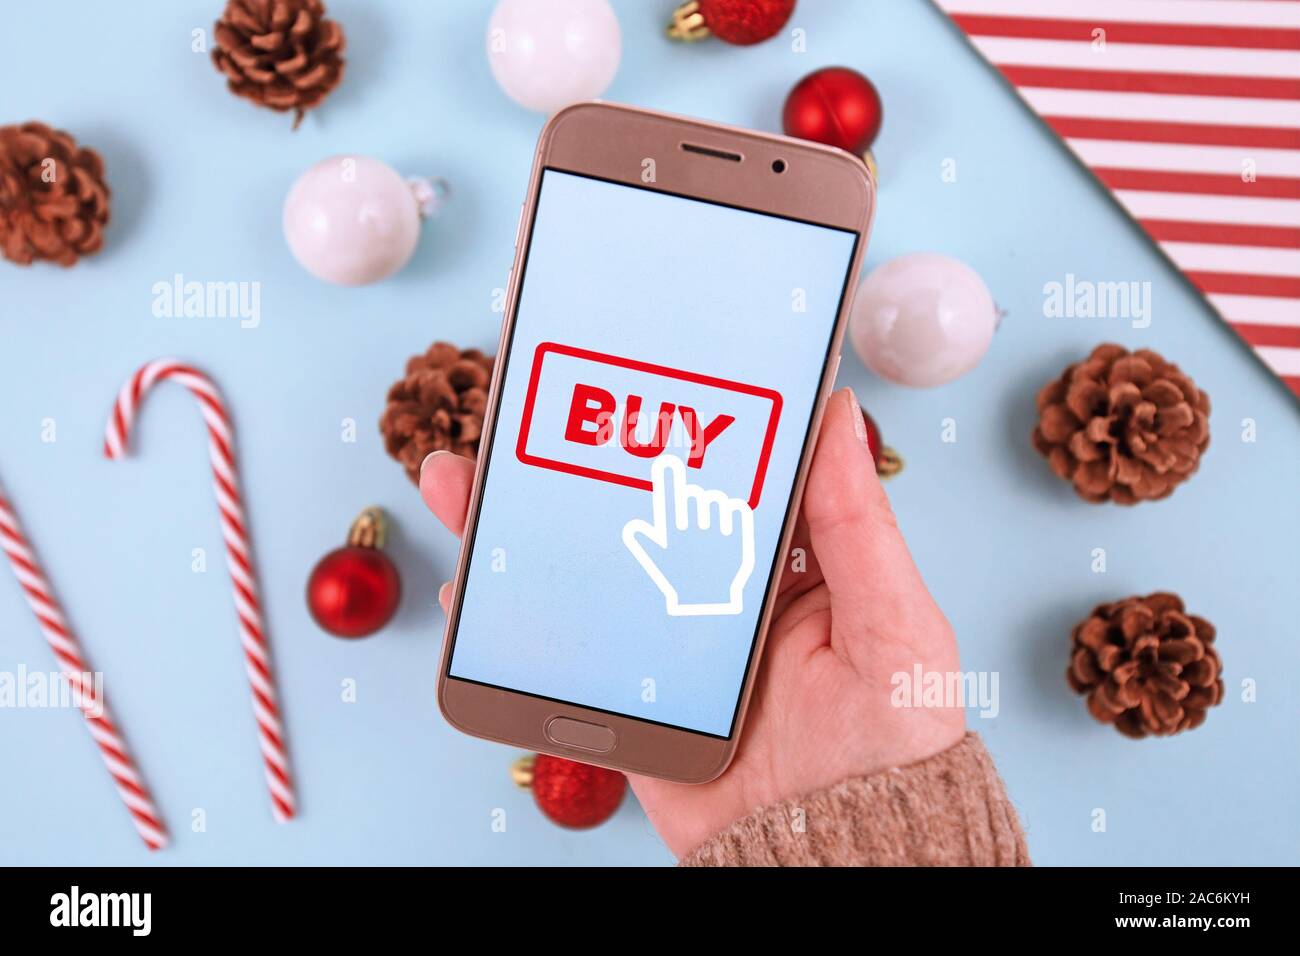 Concept for Christmas seasonal online shopping and sales with hand holding cell phone with 'Buy' click button sign in front of desk with seasonal deco Stock Photo